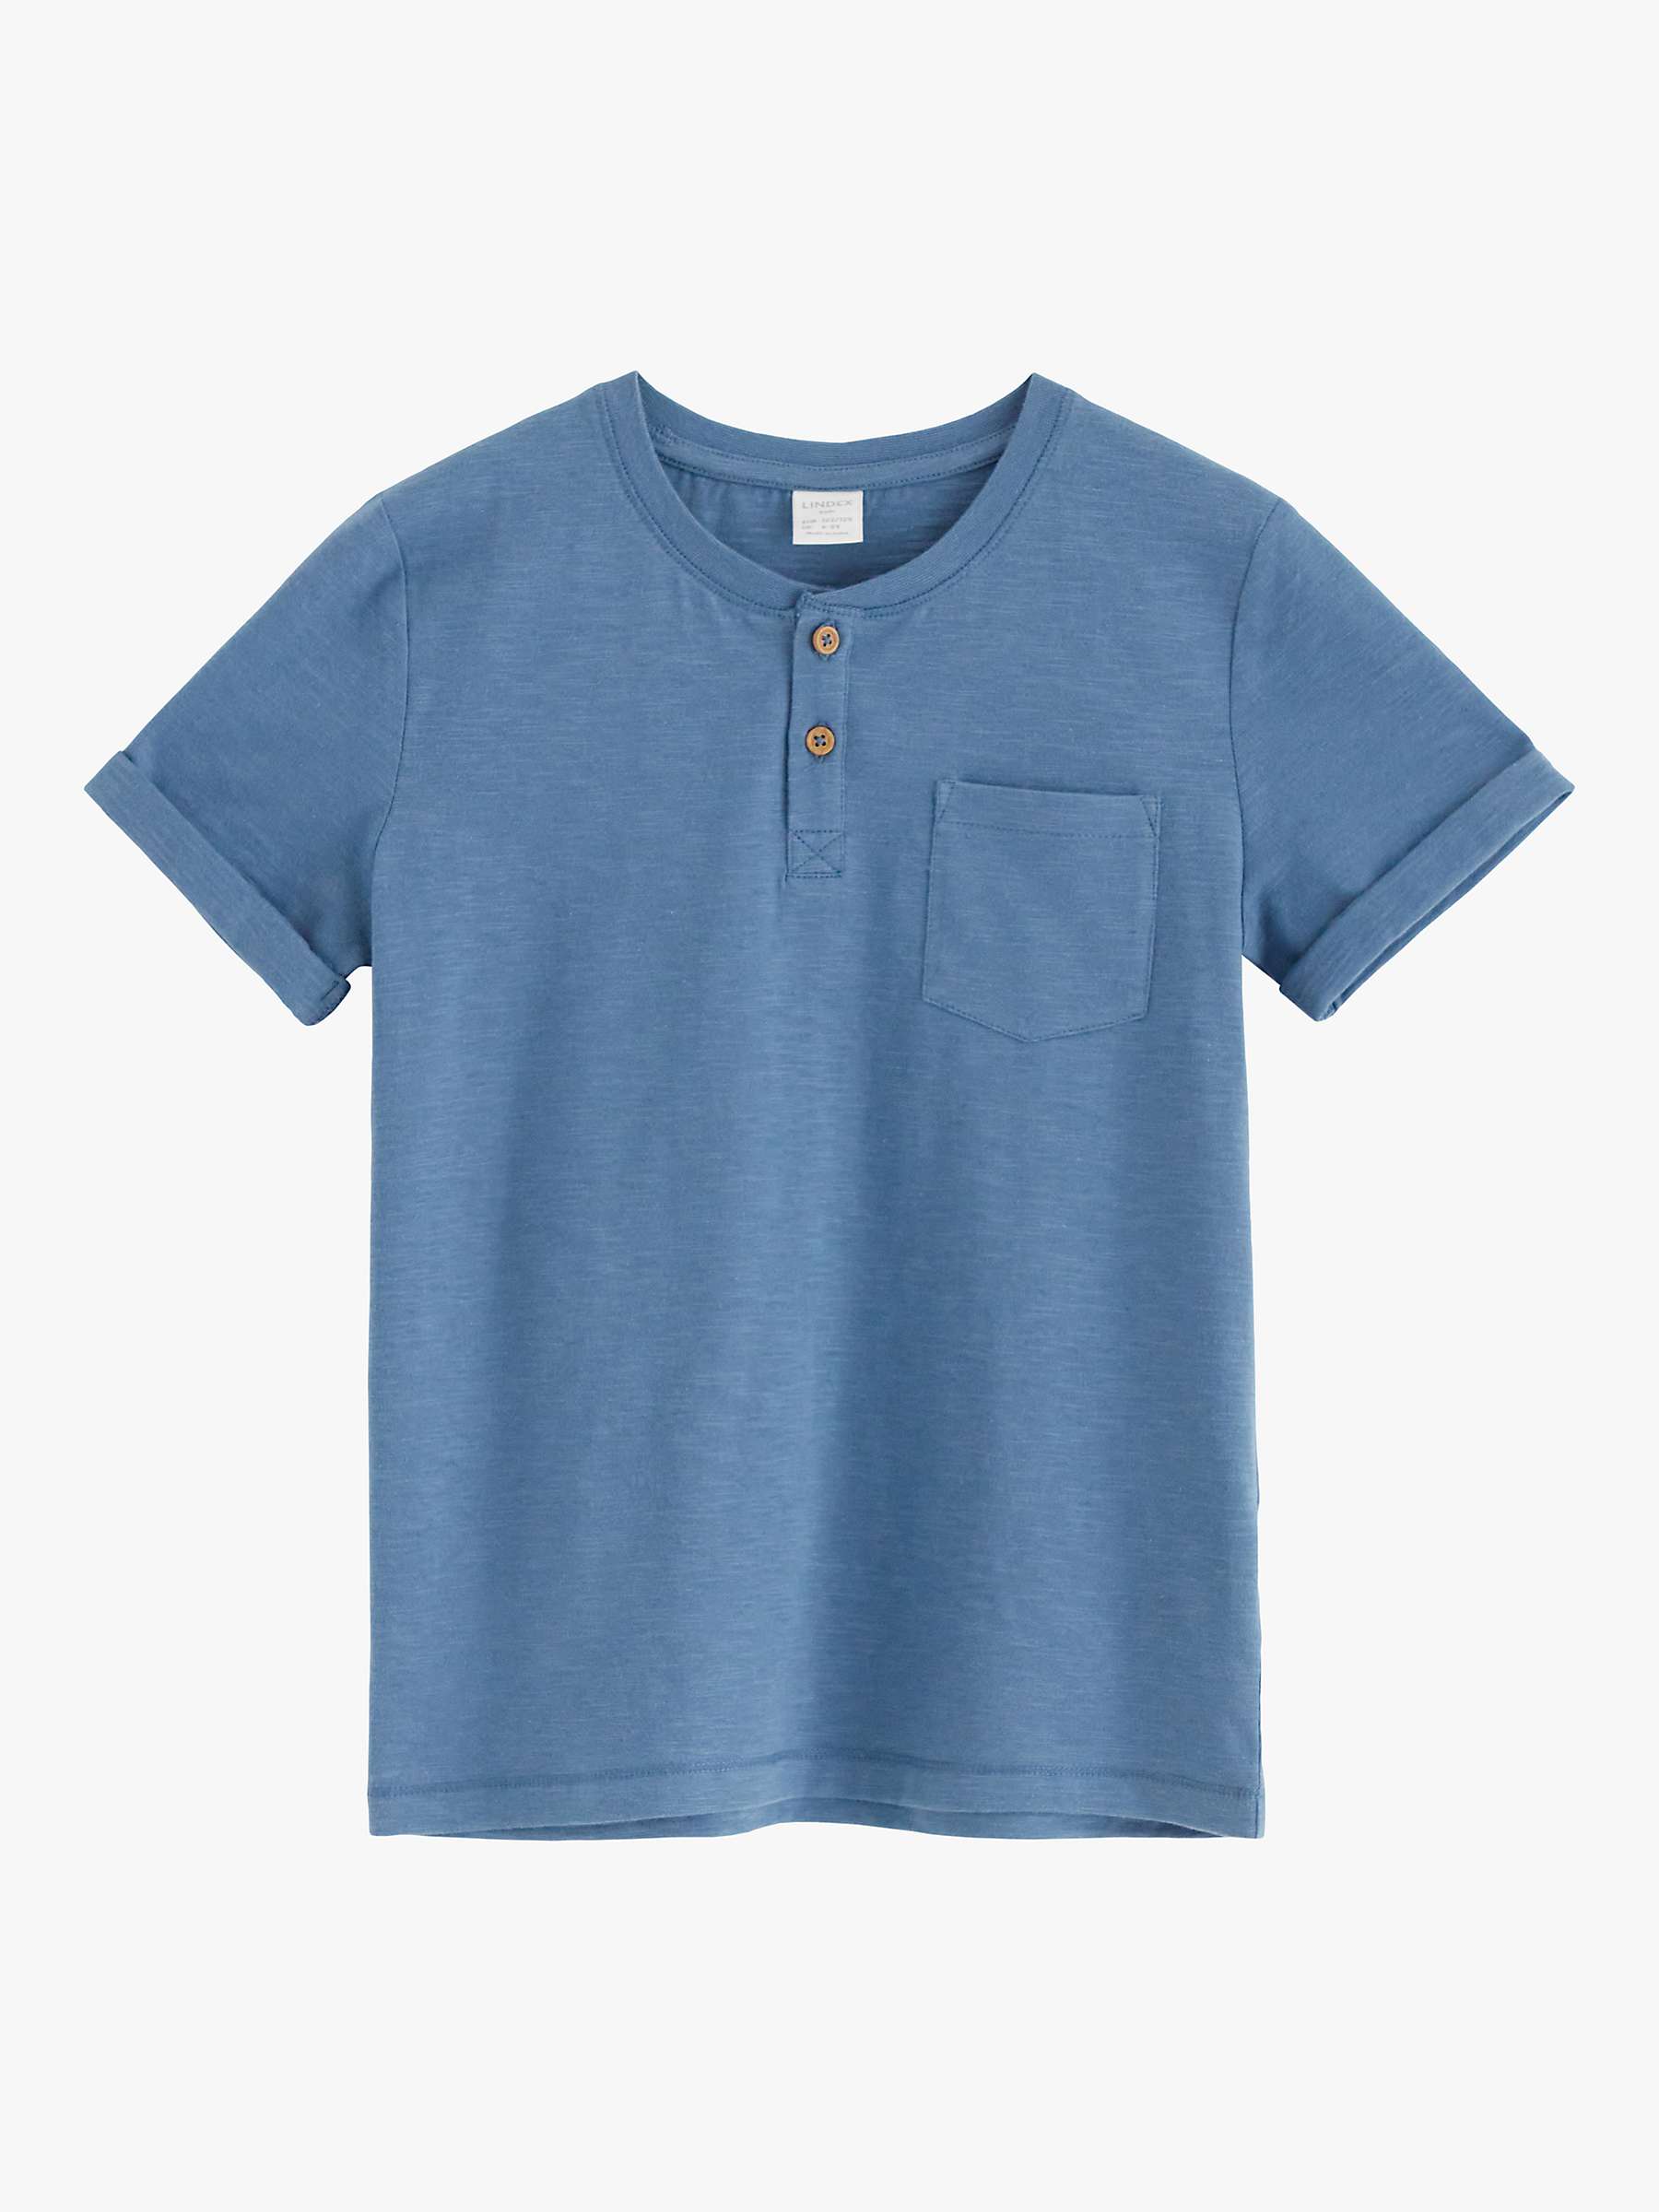 Buy Lindex Kids' Organic Cotton Essential Short Sleeved Button Top, Dusty Blue Online at johnlewis.com